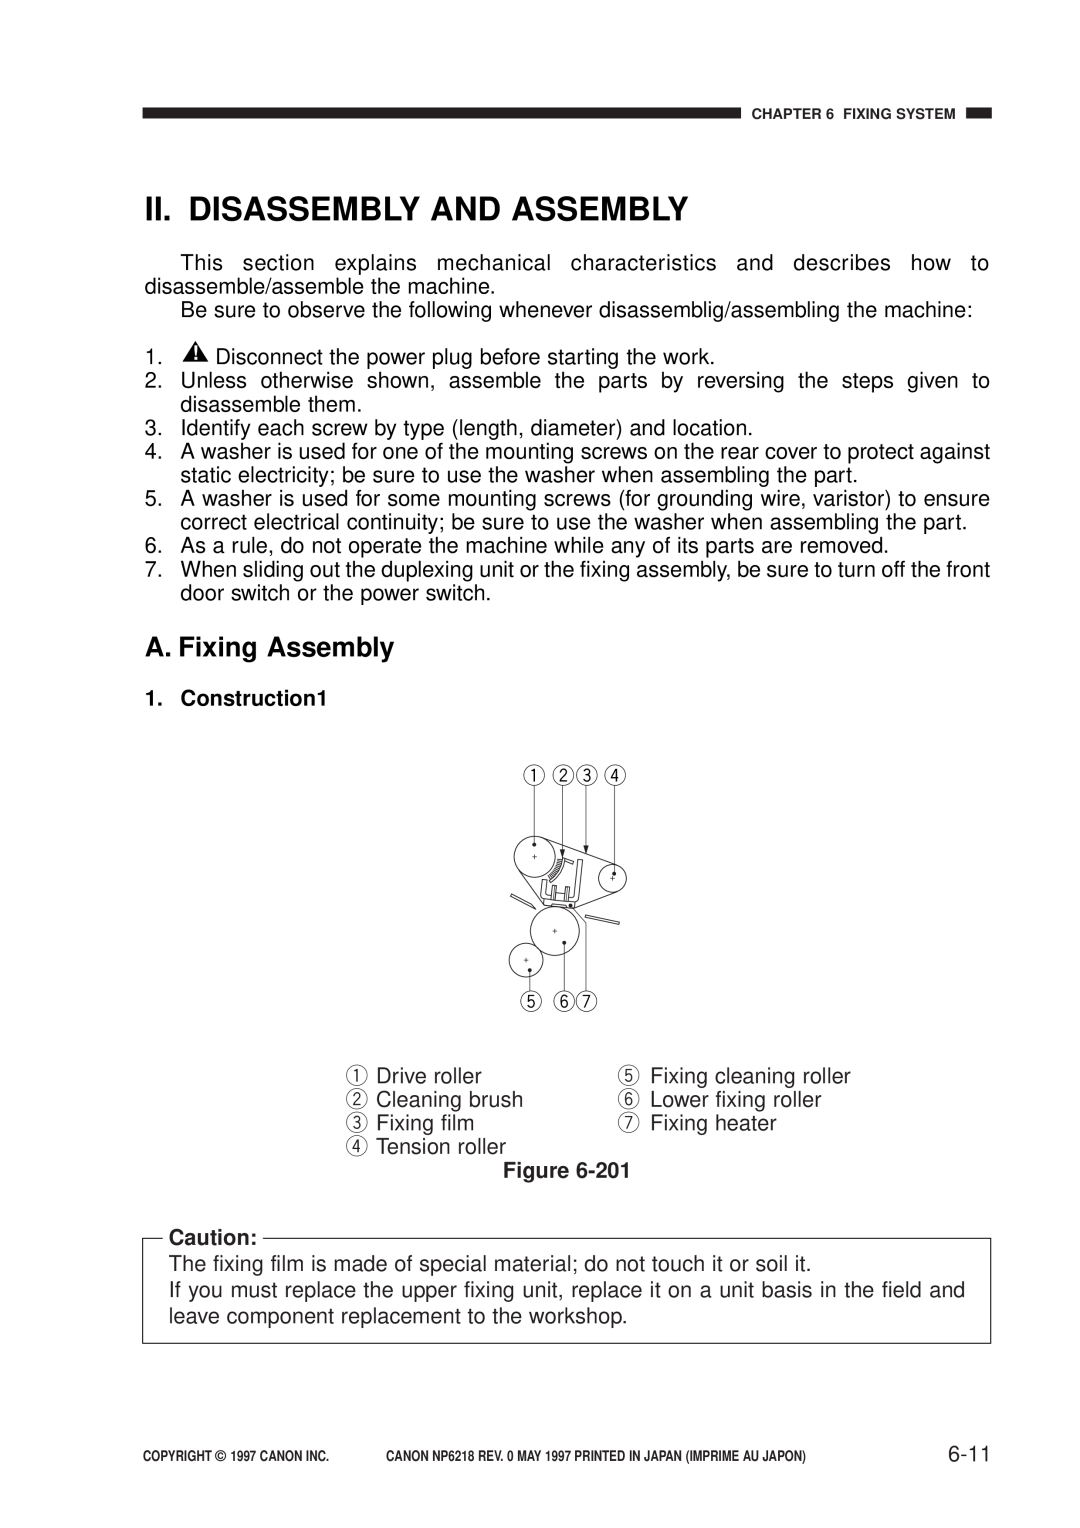 Canon FY8-13EX-000, NP6218 service manual Ii. Disassembly And Assembly, A. Fixing Assembly, Construction1, 6-11 